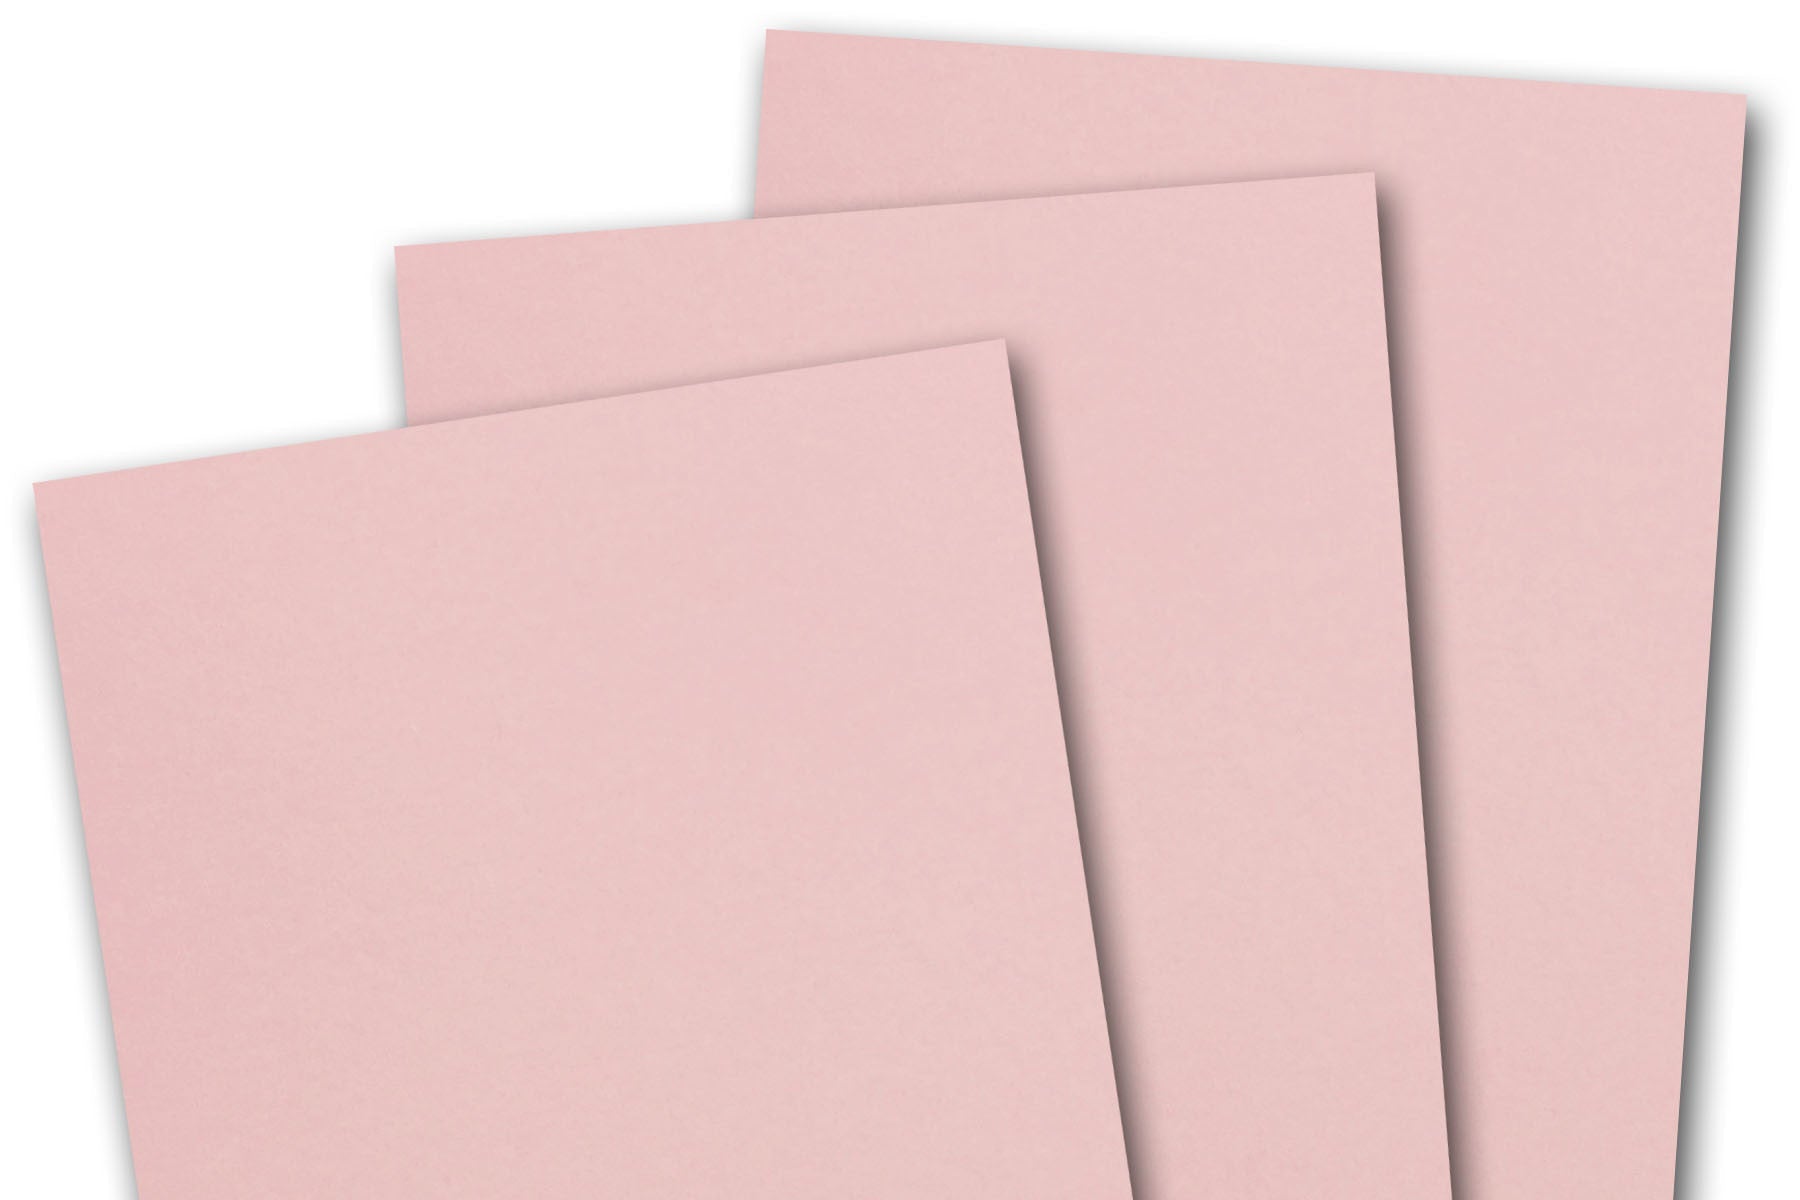 Springhill Colored Paper, Heavy Paper, Pink Paper, 24/60lb, 89gsm, 8.5 x 11, 1 Ream / 500 Sheets - Opaque, Thick Paper (024042R)